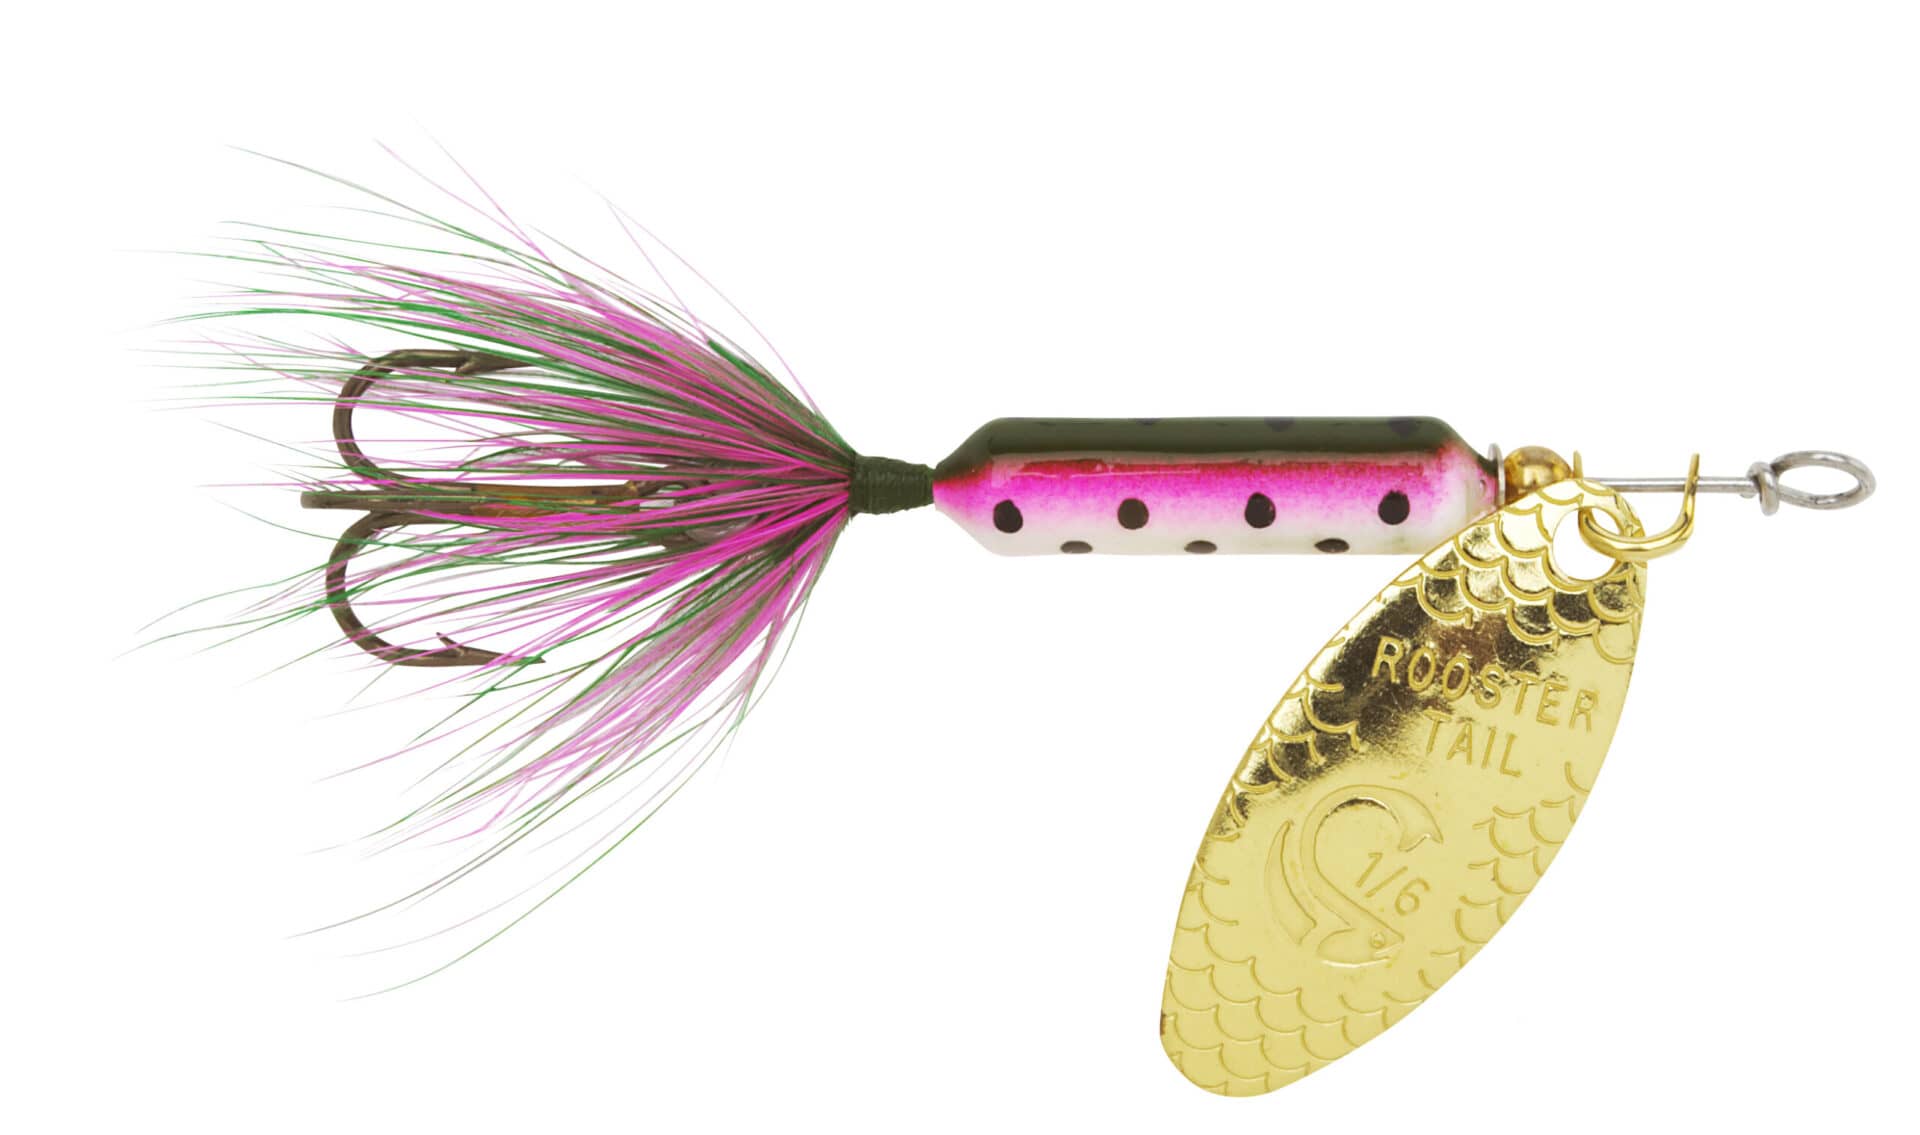 Worden's rooster tail 1oz - Armadale Angling